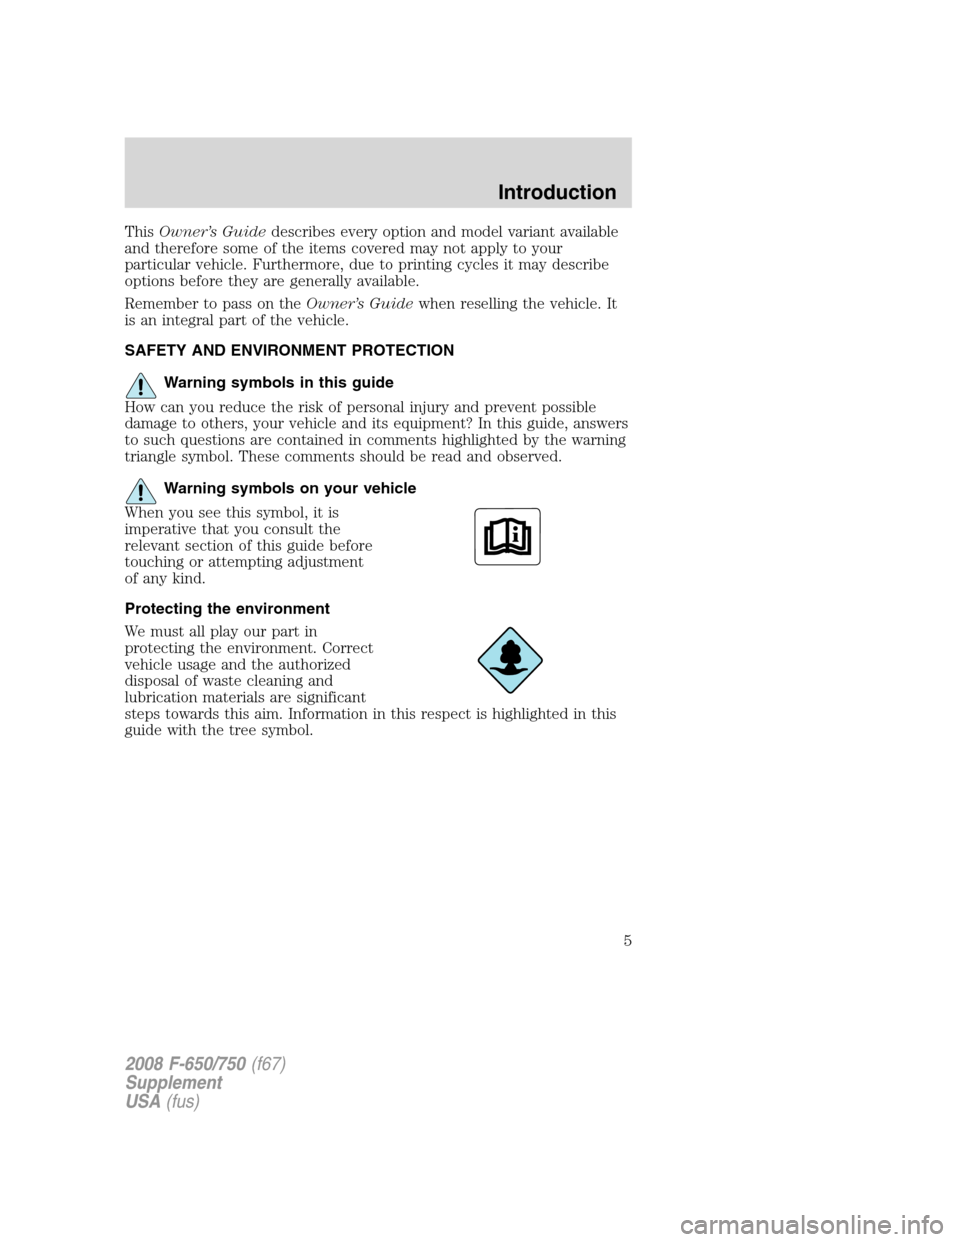 FORD F750 2008 11.G Owners Manual ThisOwner’s Guidedescribes every option and model variant available
and therefore some of the items covered may not apply to your
particular vehicle. Furthermore, due to printing cycles it may descr